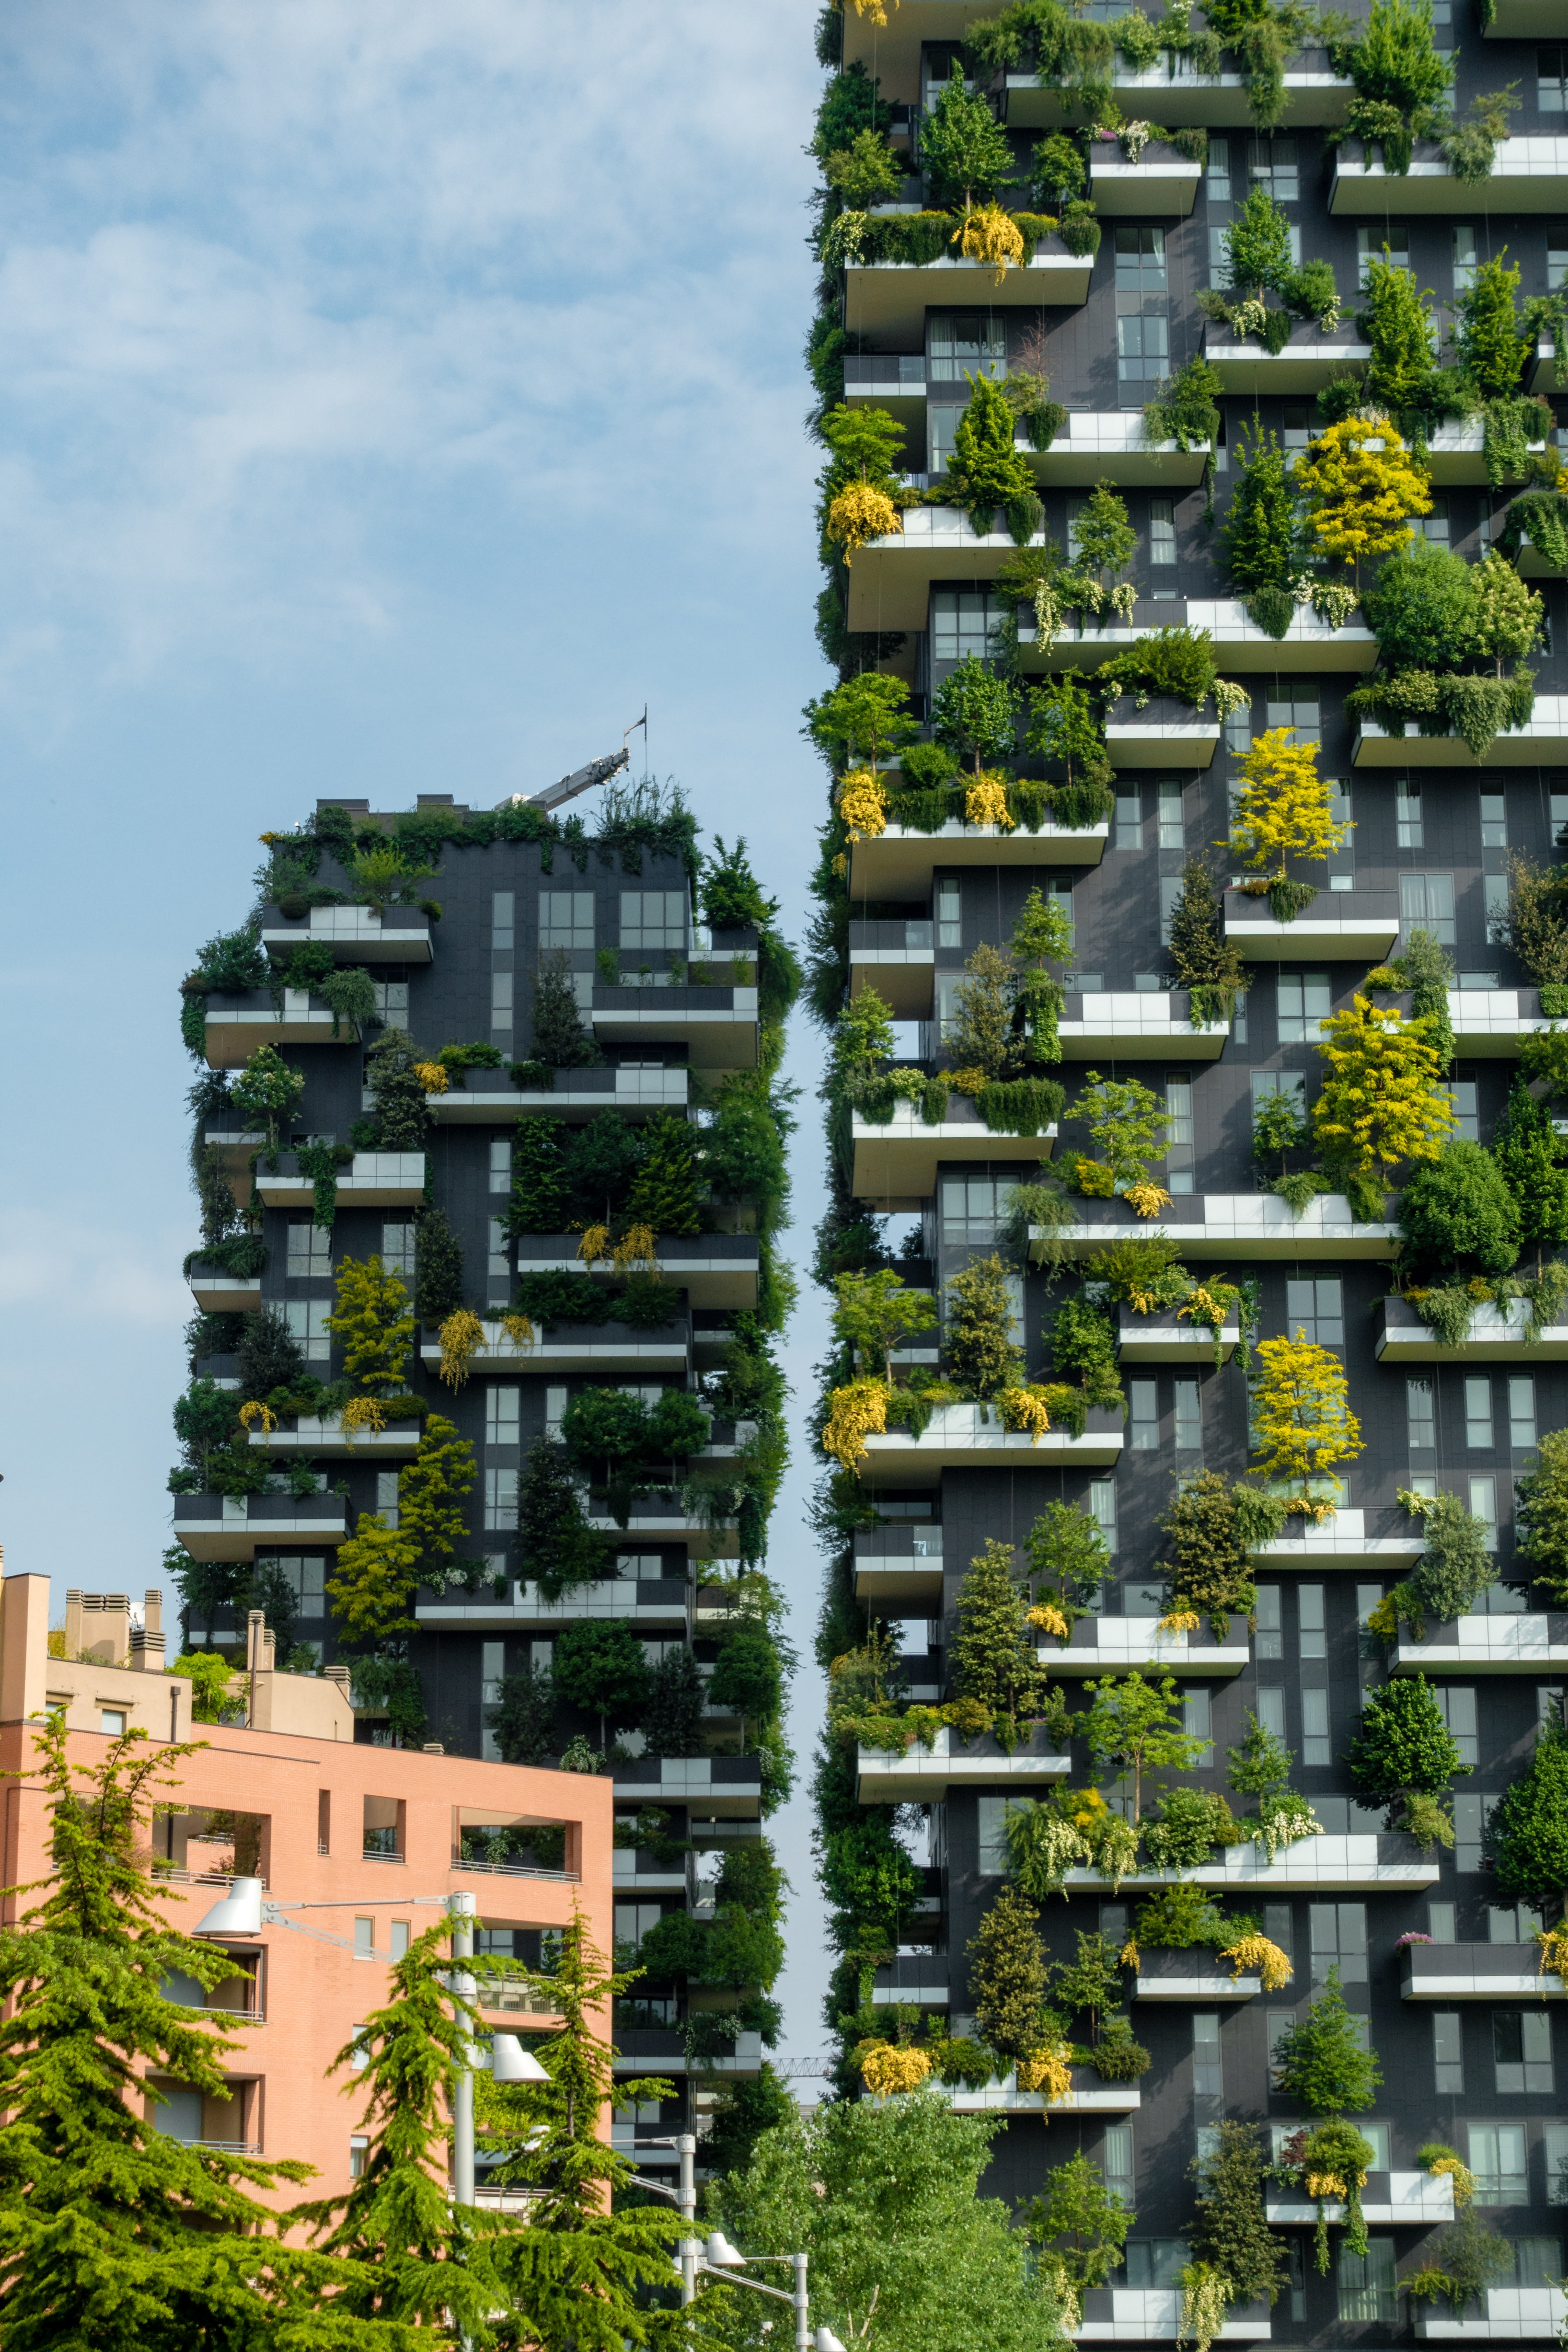 The Vertical Forest building in Milan - Photo by Daniell Sessler on Unsplash